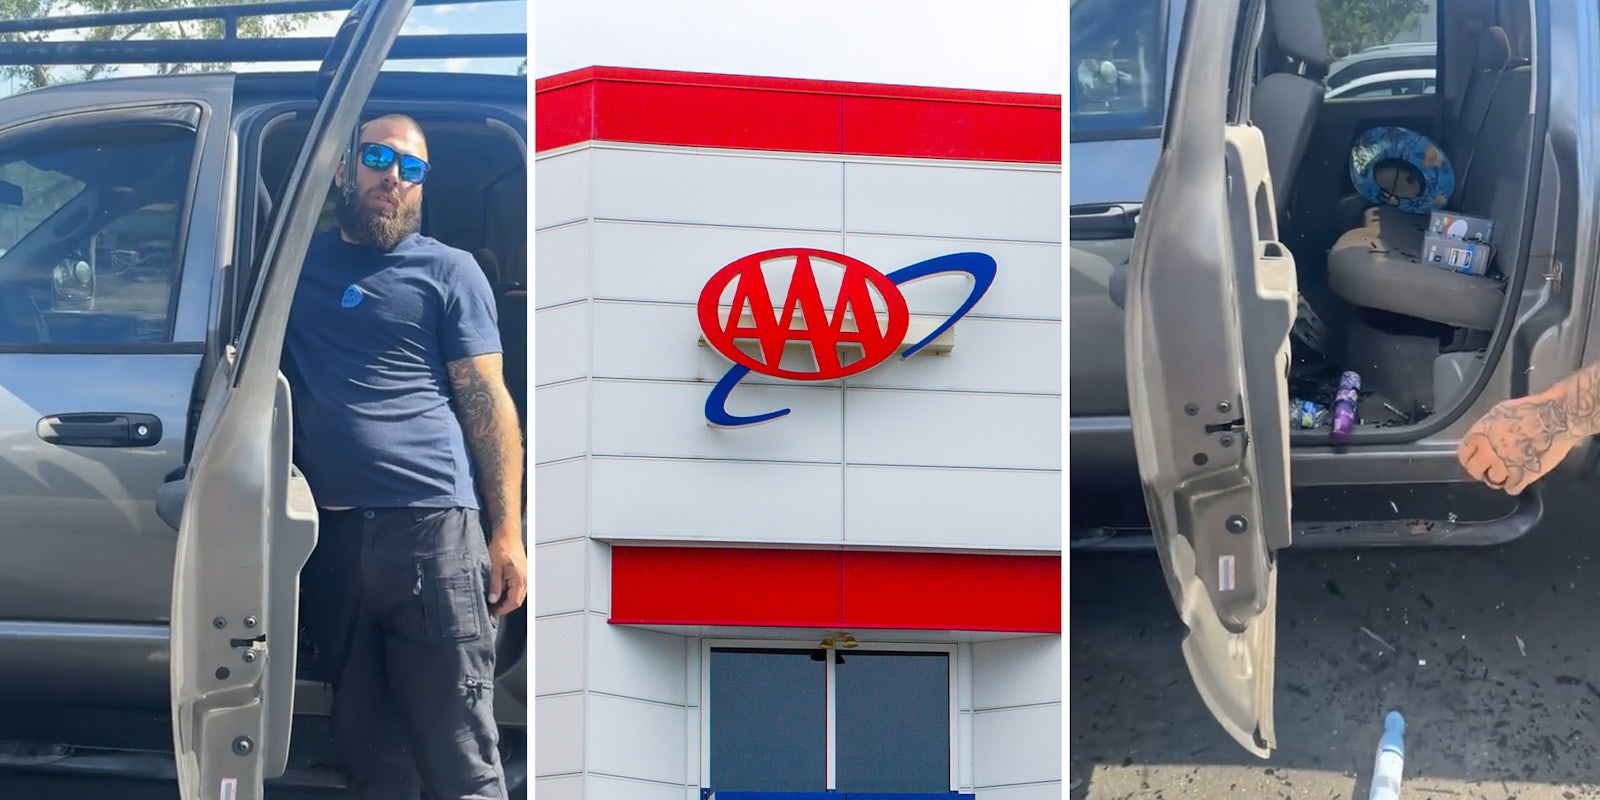 Man gets sick of waiting for AAA to unlock car door, does something shocking instead